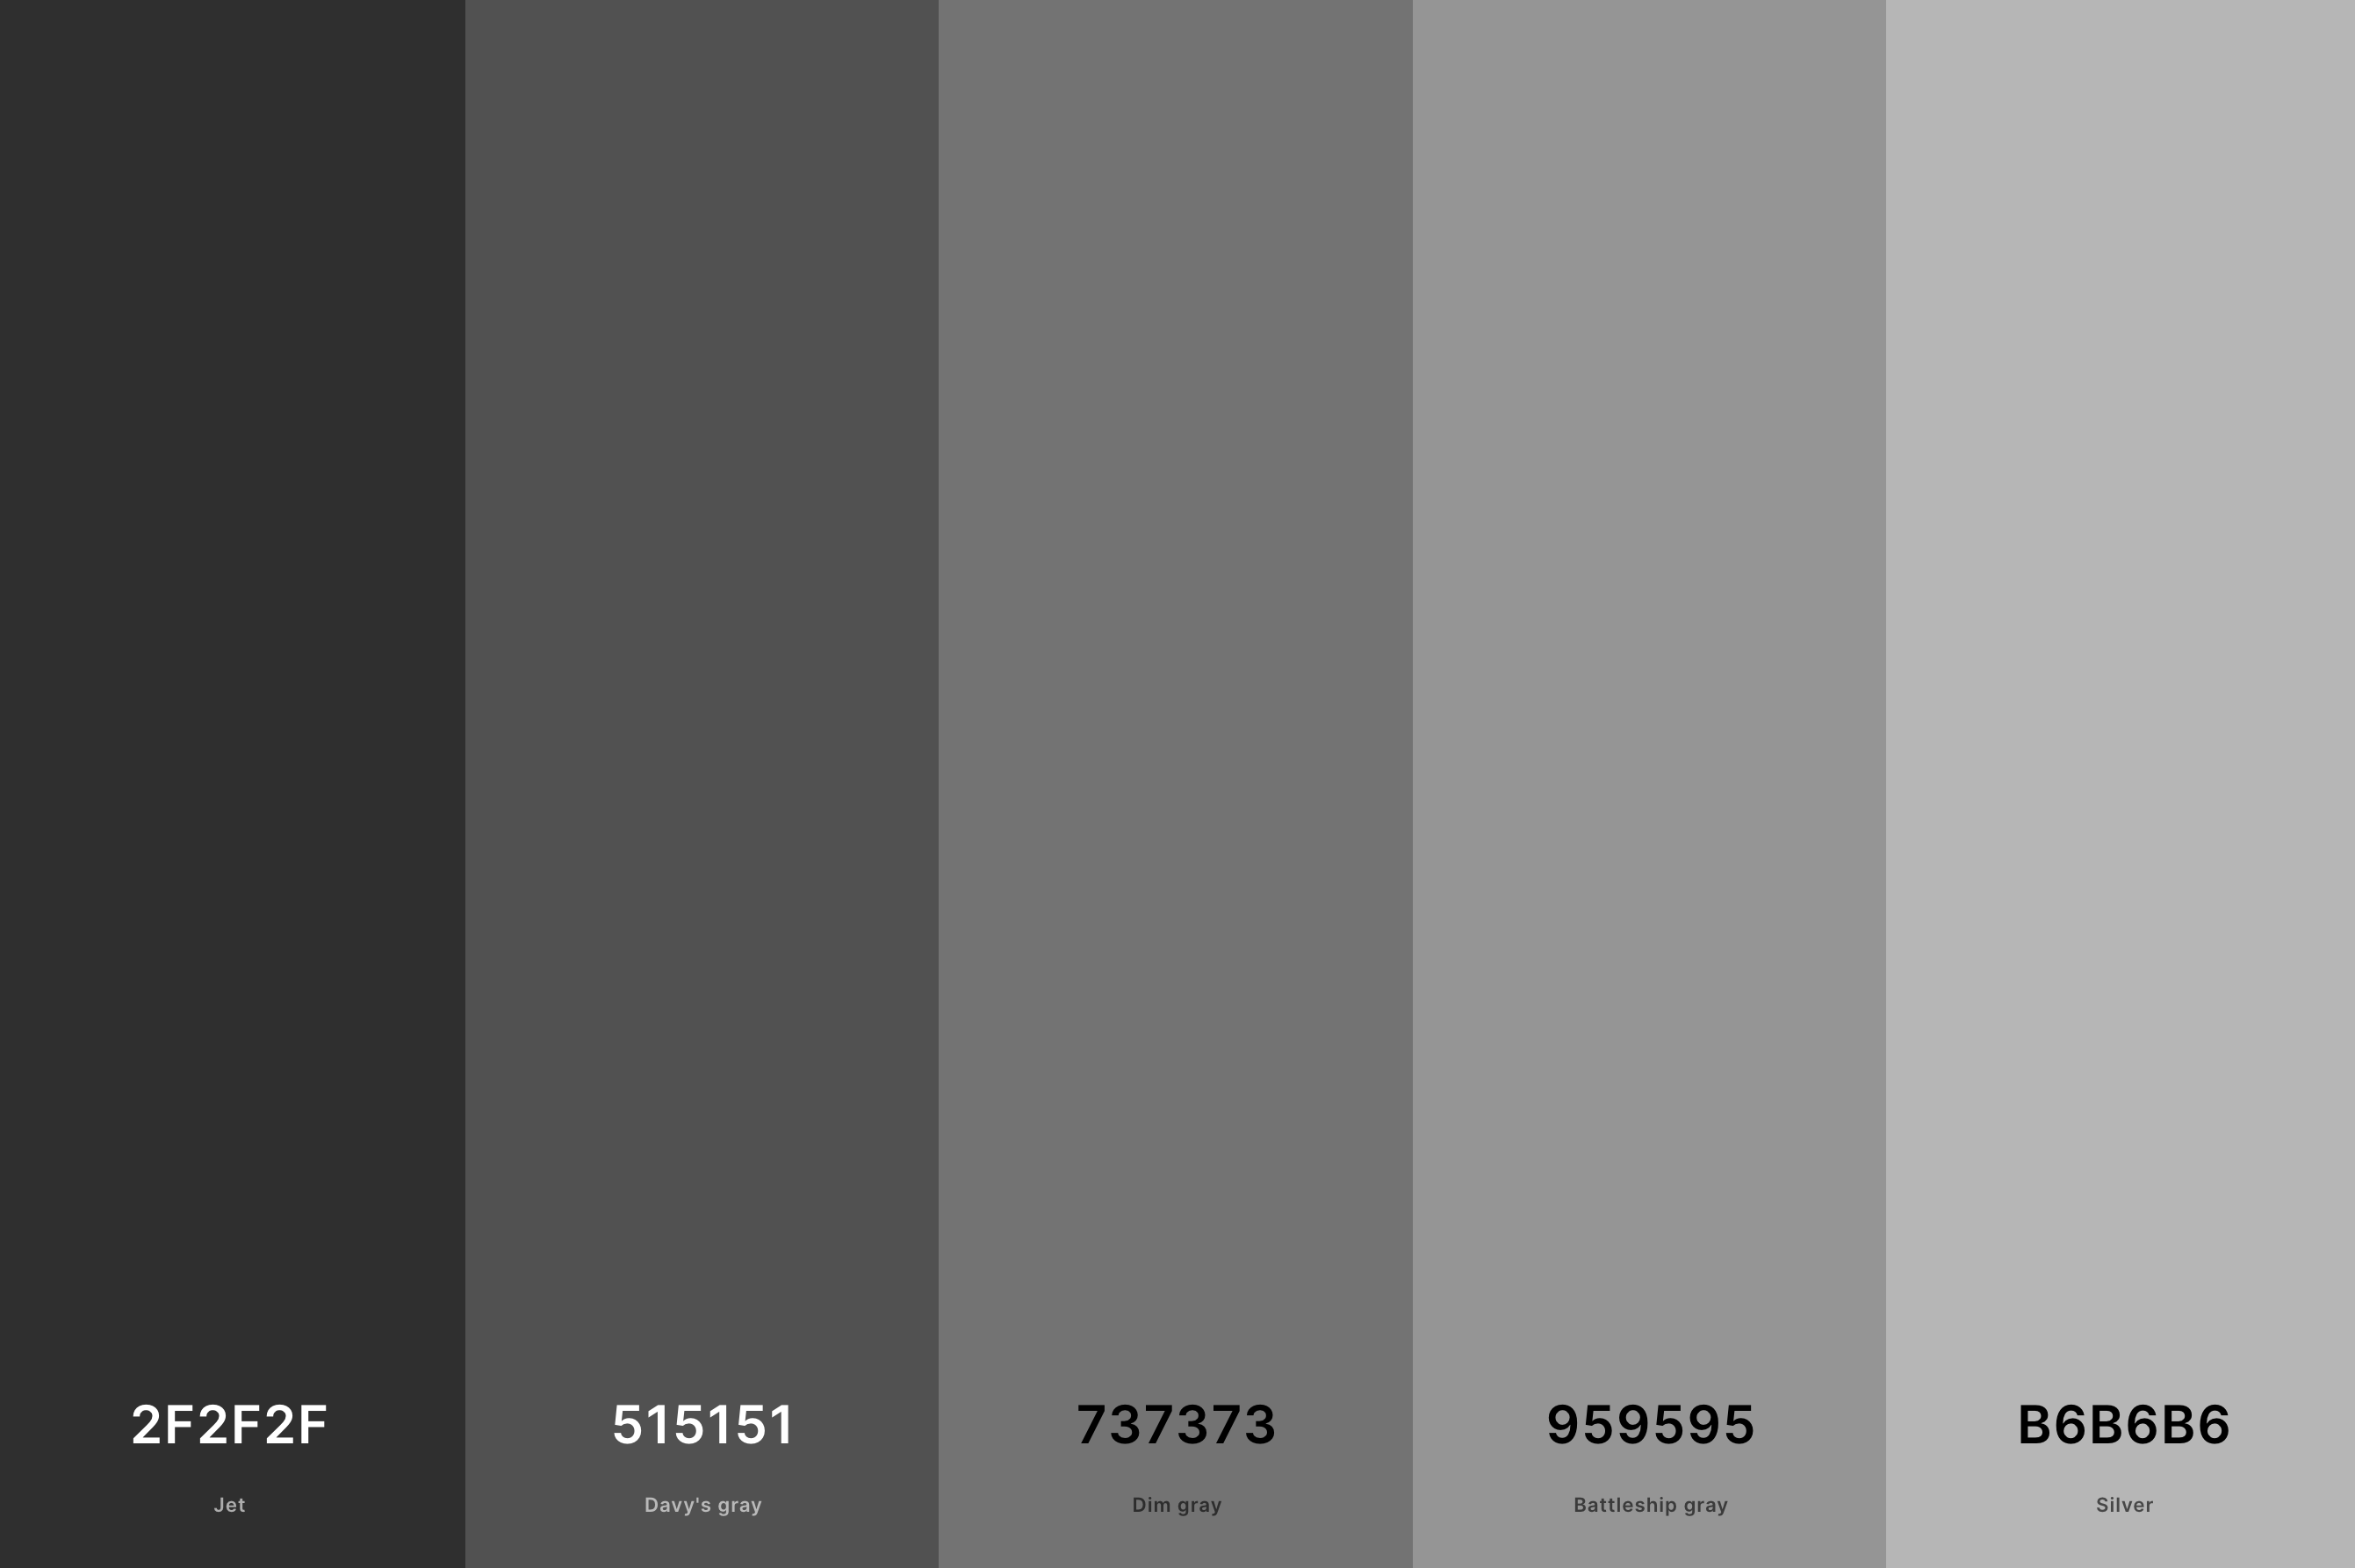 10. Shades Of Gray Color Palette Color Palette with Jet (Hex #2F2F2F) + Davy'S Gray (Hex #515151) + Dim Gray (Hex #737373) + Battleship Gray (Hex #959595) + Silver (Hex #B6B6B6) Color Palette with Hex Codes